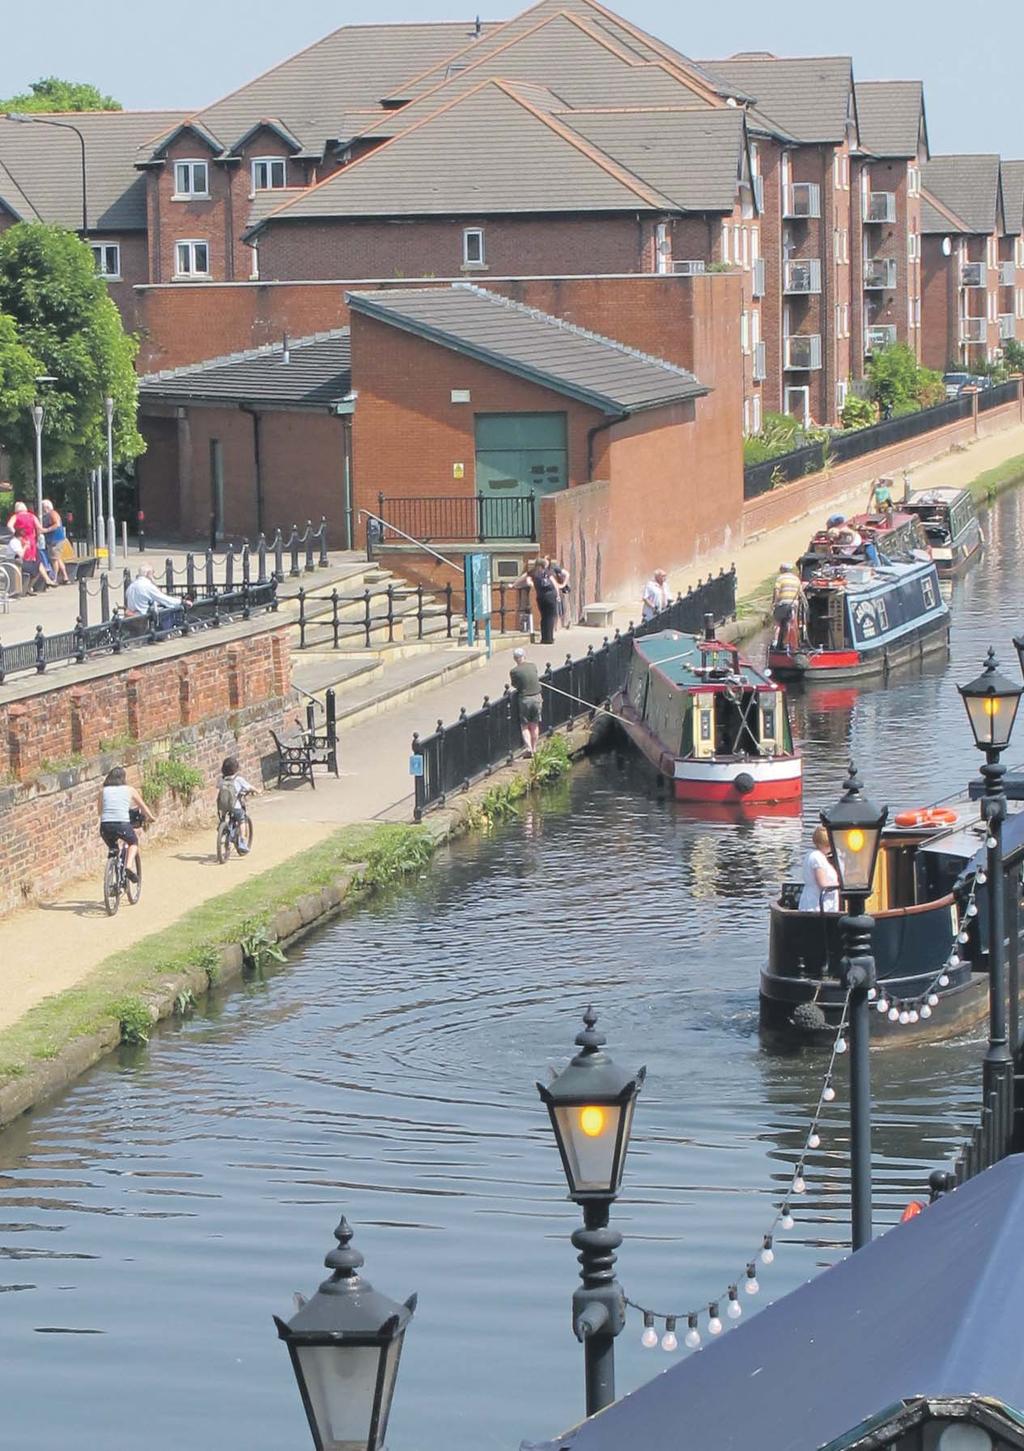 Getting Manchester moving Sustrans has recently completed work to provide a safe walking and cycling path along a canal towpath between Sale and Stretford in Greater Manchester, crossing the M60 and